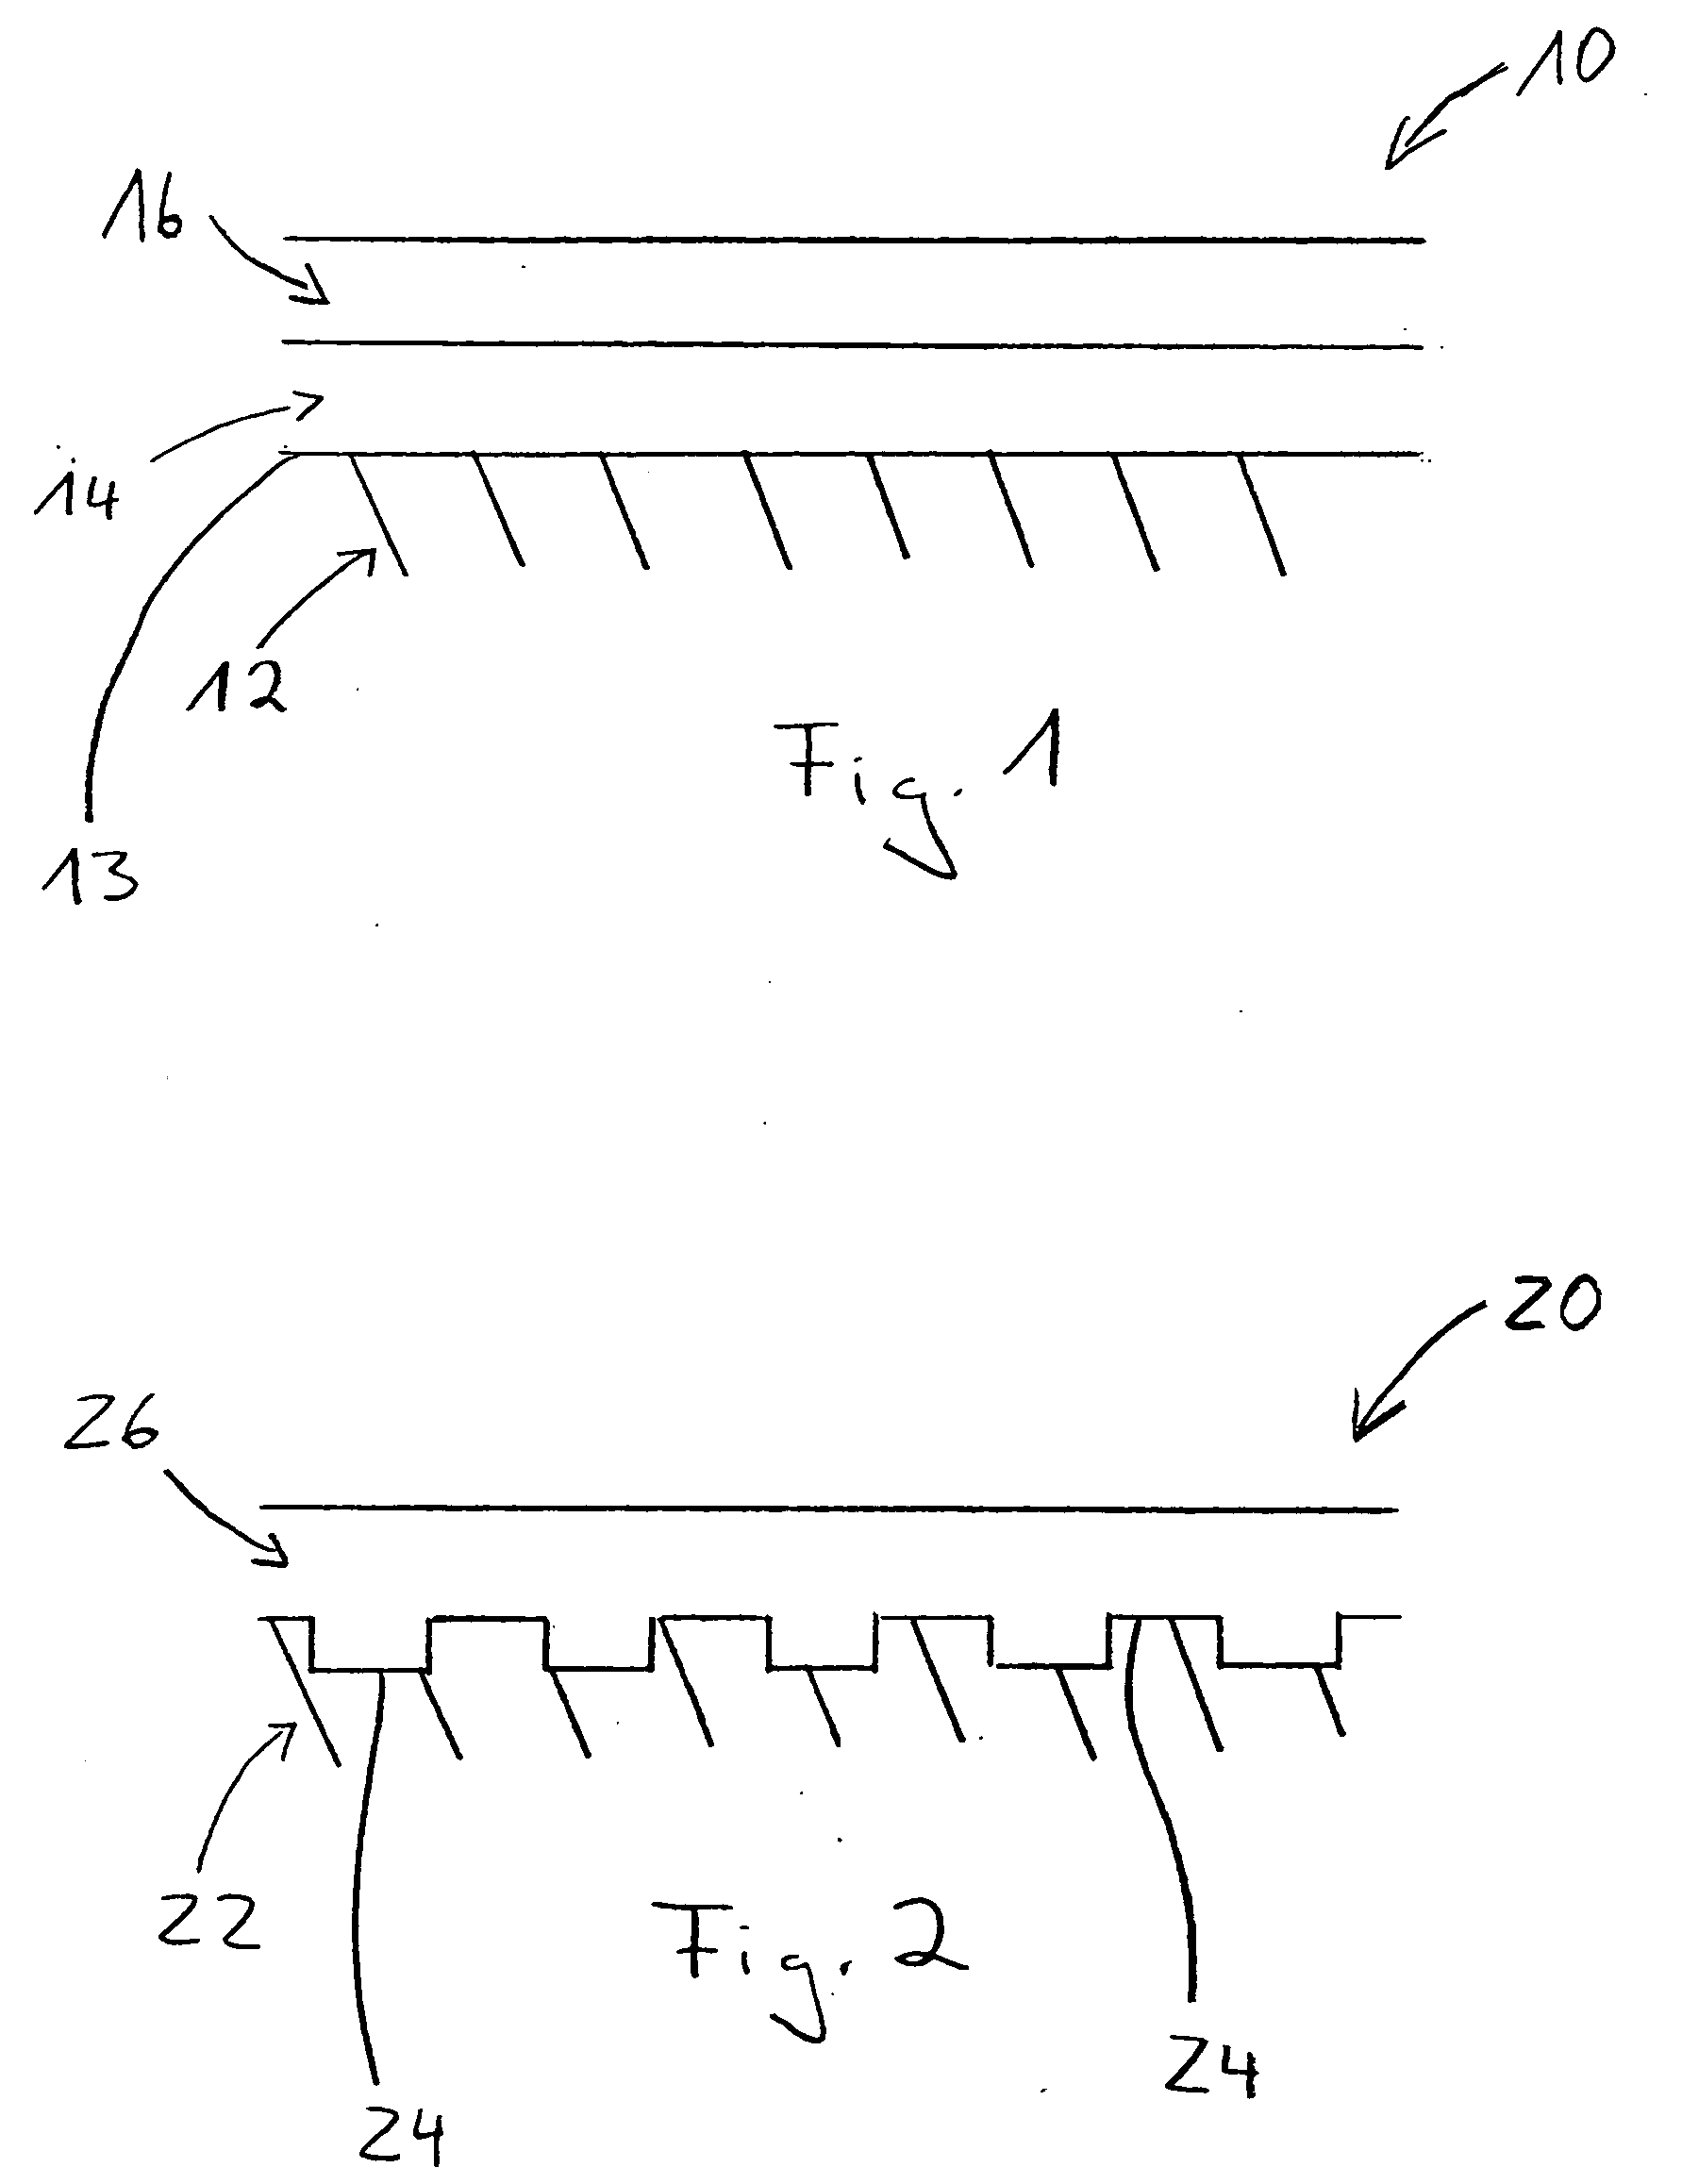 Method of treating a surface